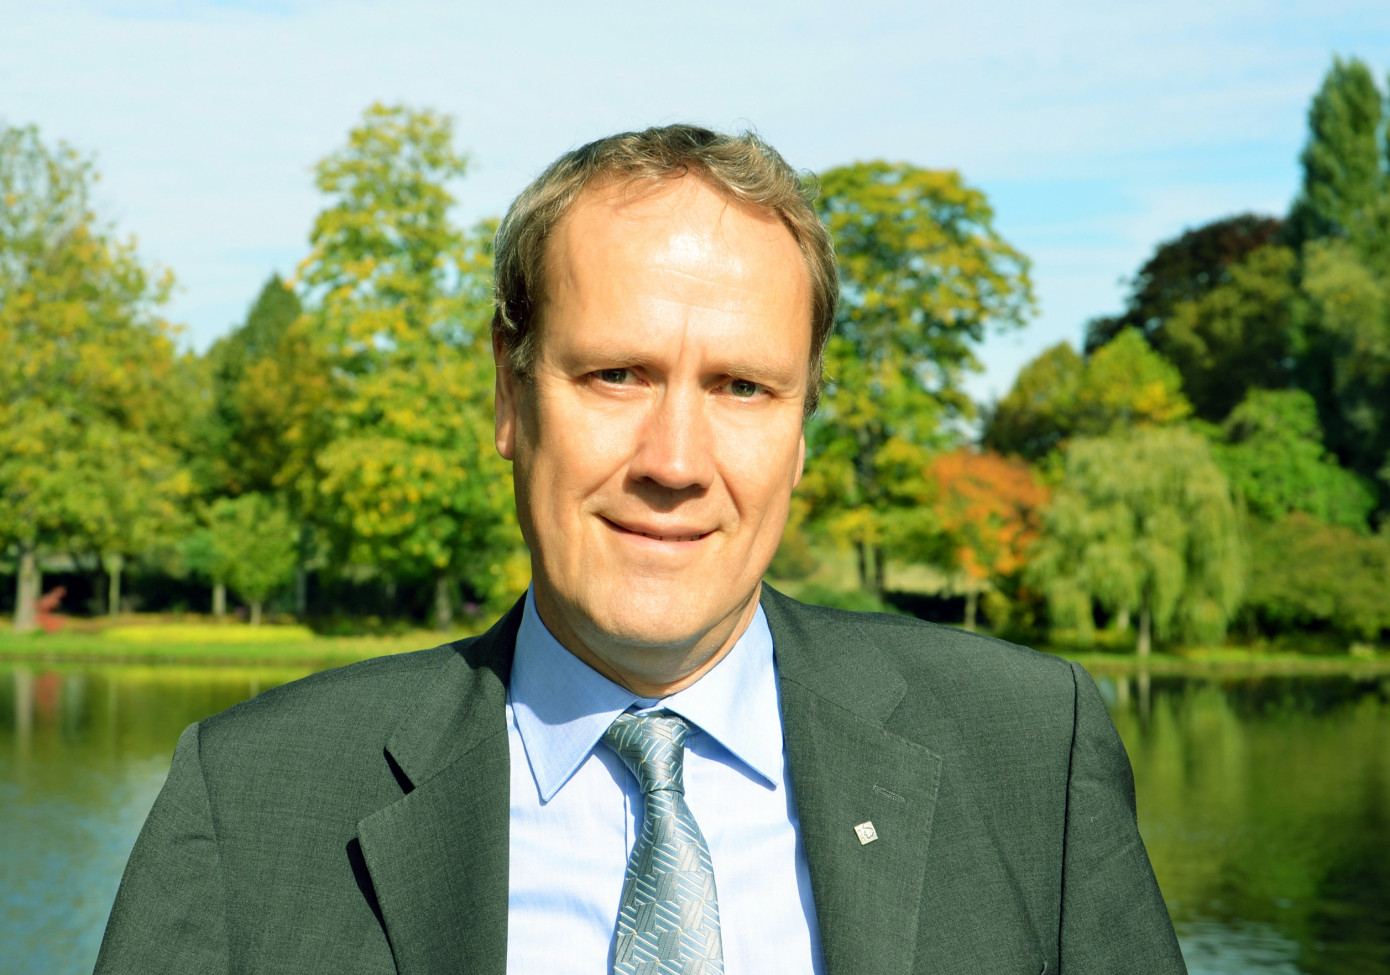 Kim Carstensen on FSC plan to double its share in global timber trade